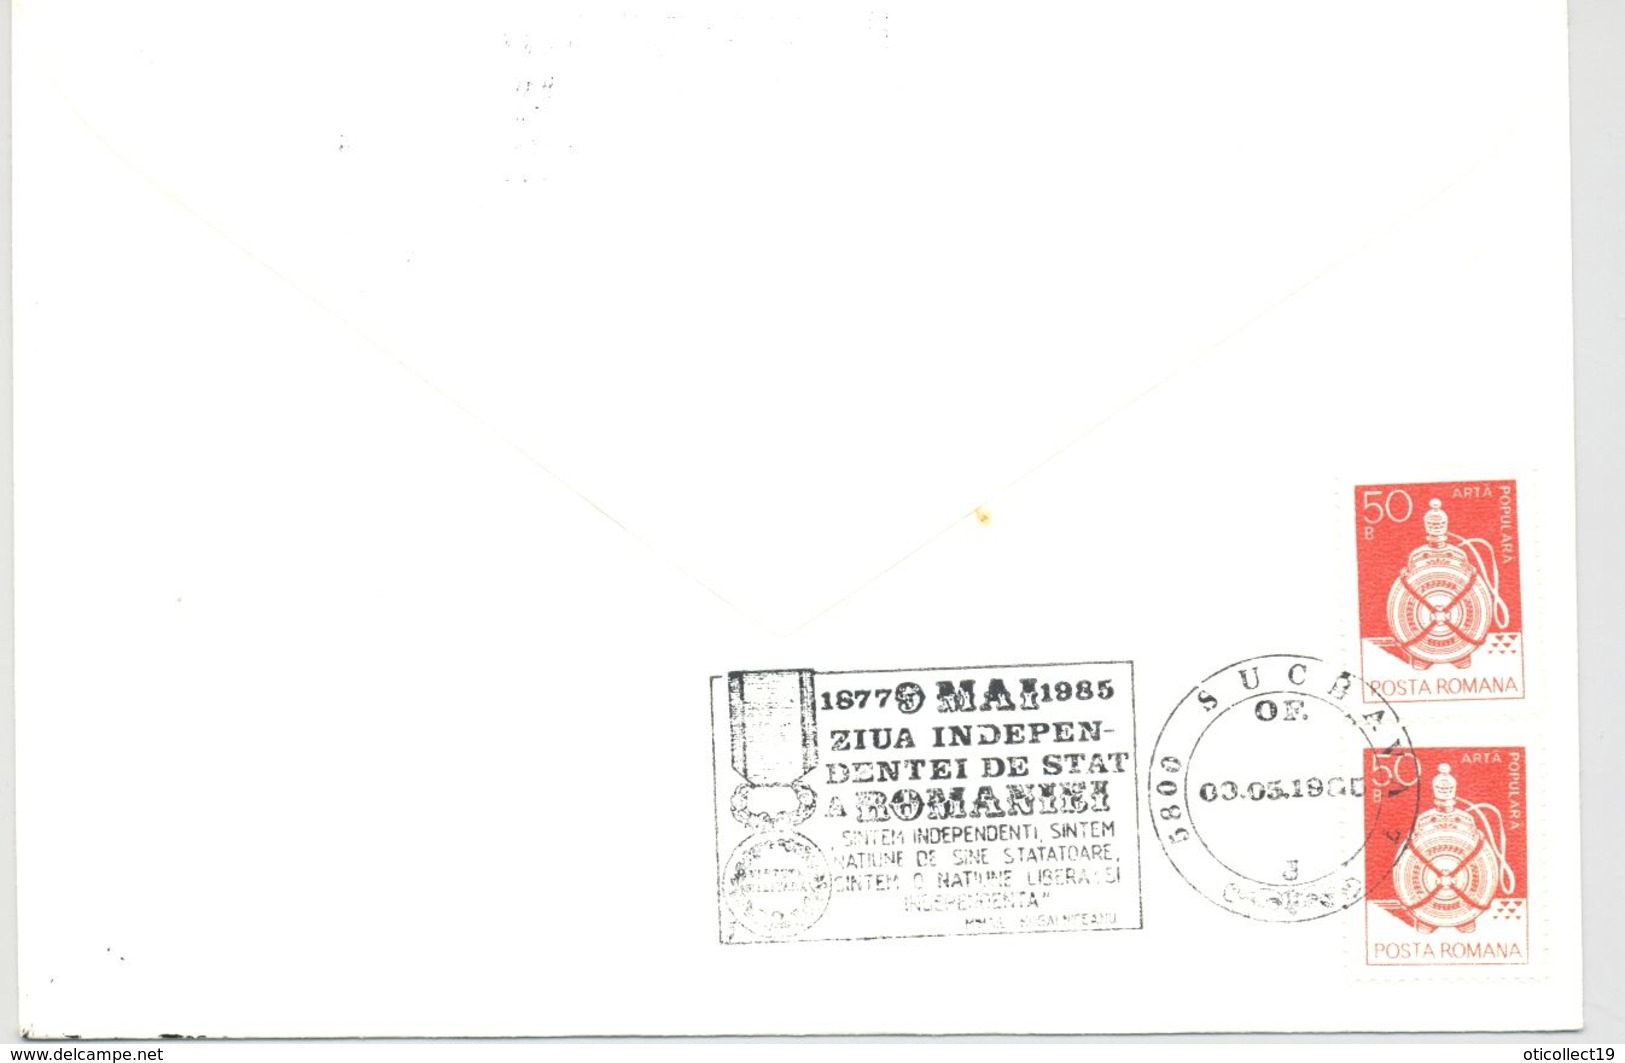 ROMANIAN STATE INDEPENDENCE ANNIVERSARY, SPECIAL POSTMARK ON COVER, POTTERY STAMP, 1985, ROMANIA - Briefe U. Dokumente